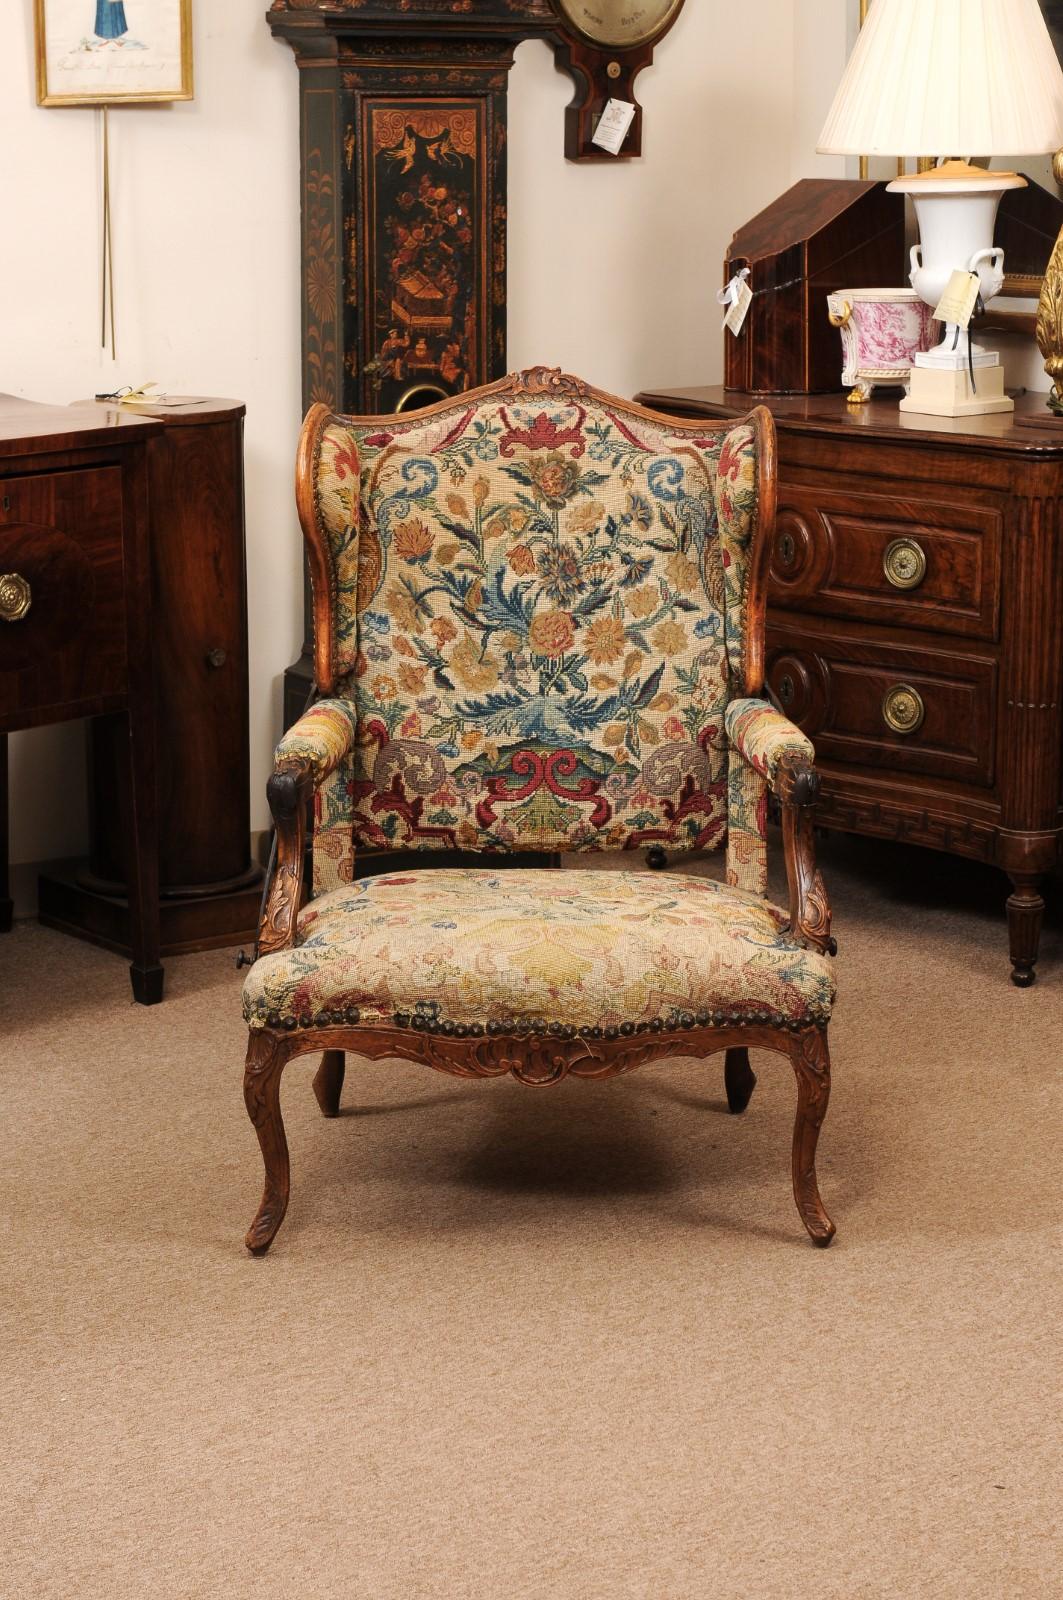 Early 18th Century French Regence Period Walnut Ratchet Wing Chair with Needlewo For Sale 9